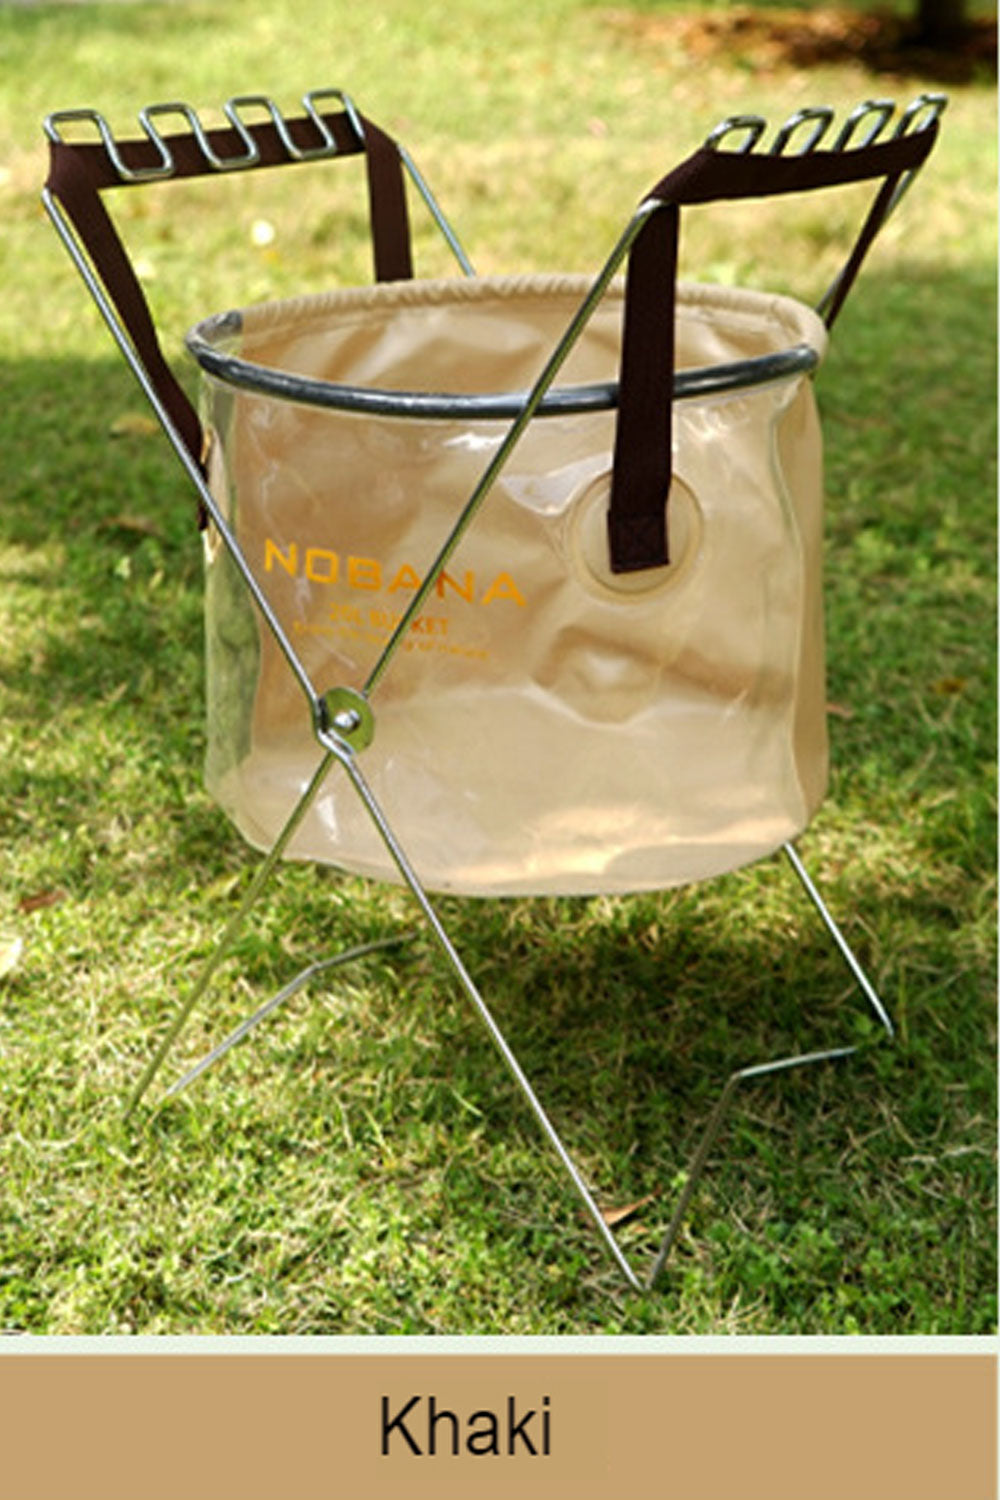 New Outdoor Folding Bucket For Camping, Self-Driving Tour, Portable Barbecue, Dishwashing Bucket, Telescopic Fishing Bucket